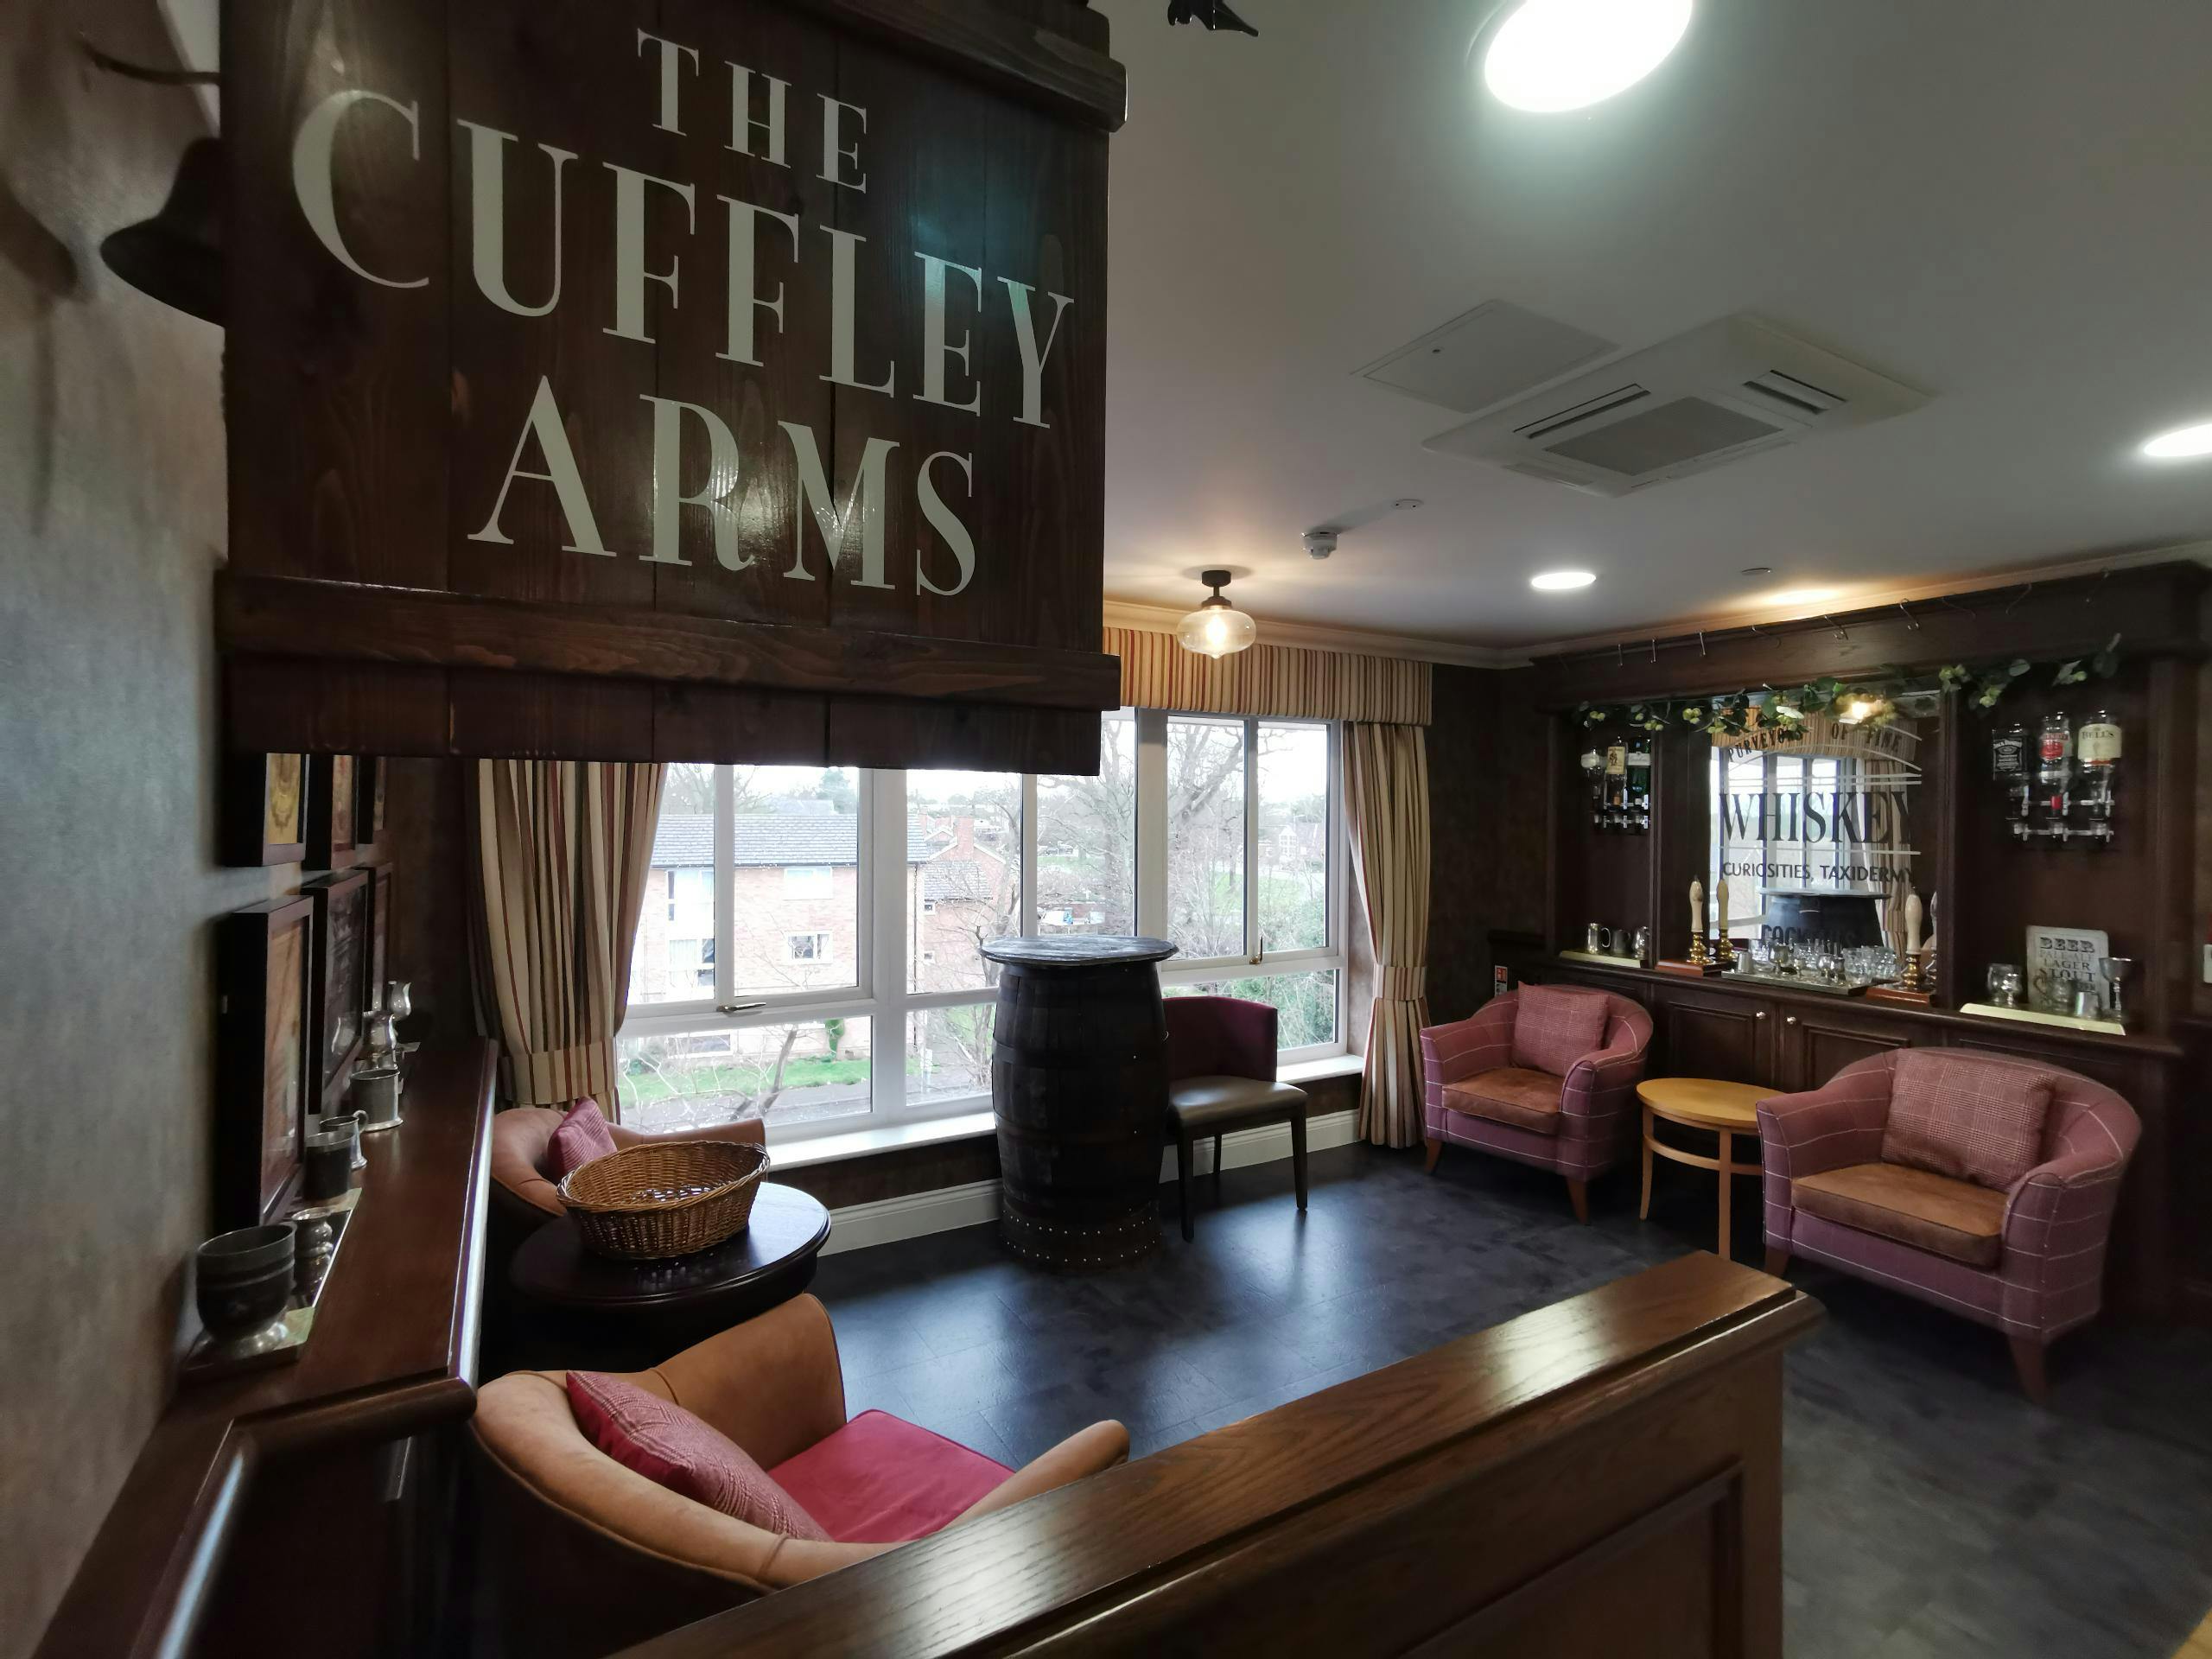 Pub of Cuffley Manor care home in Potters Bar, Hertfordshire